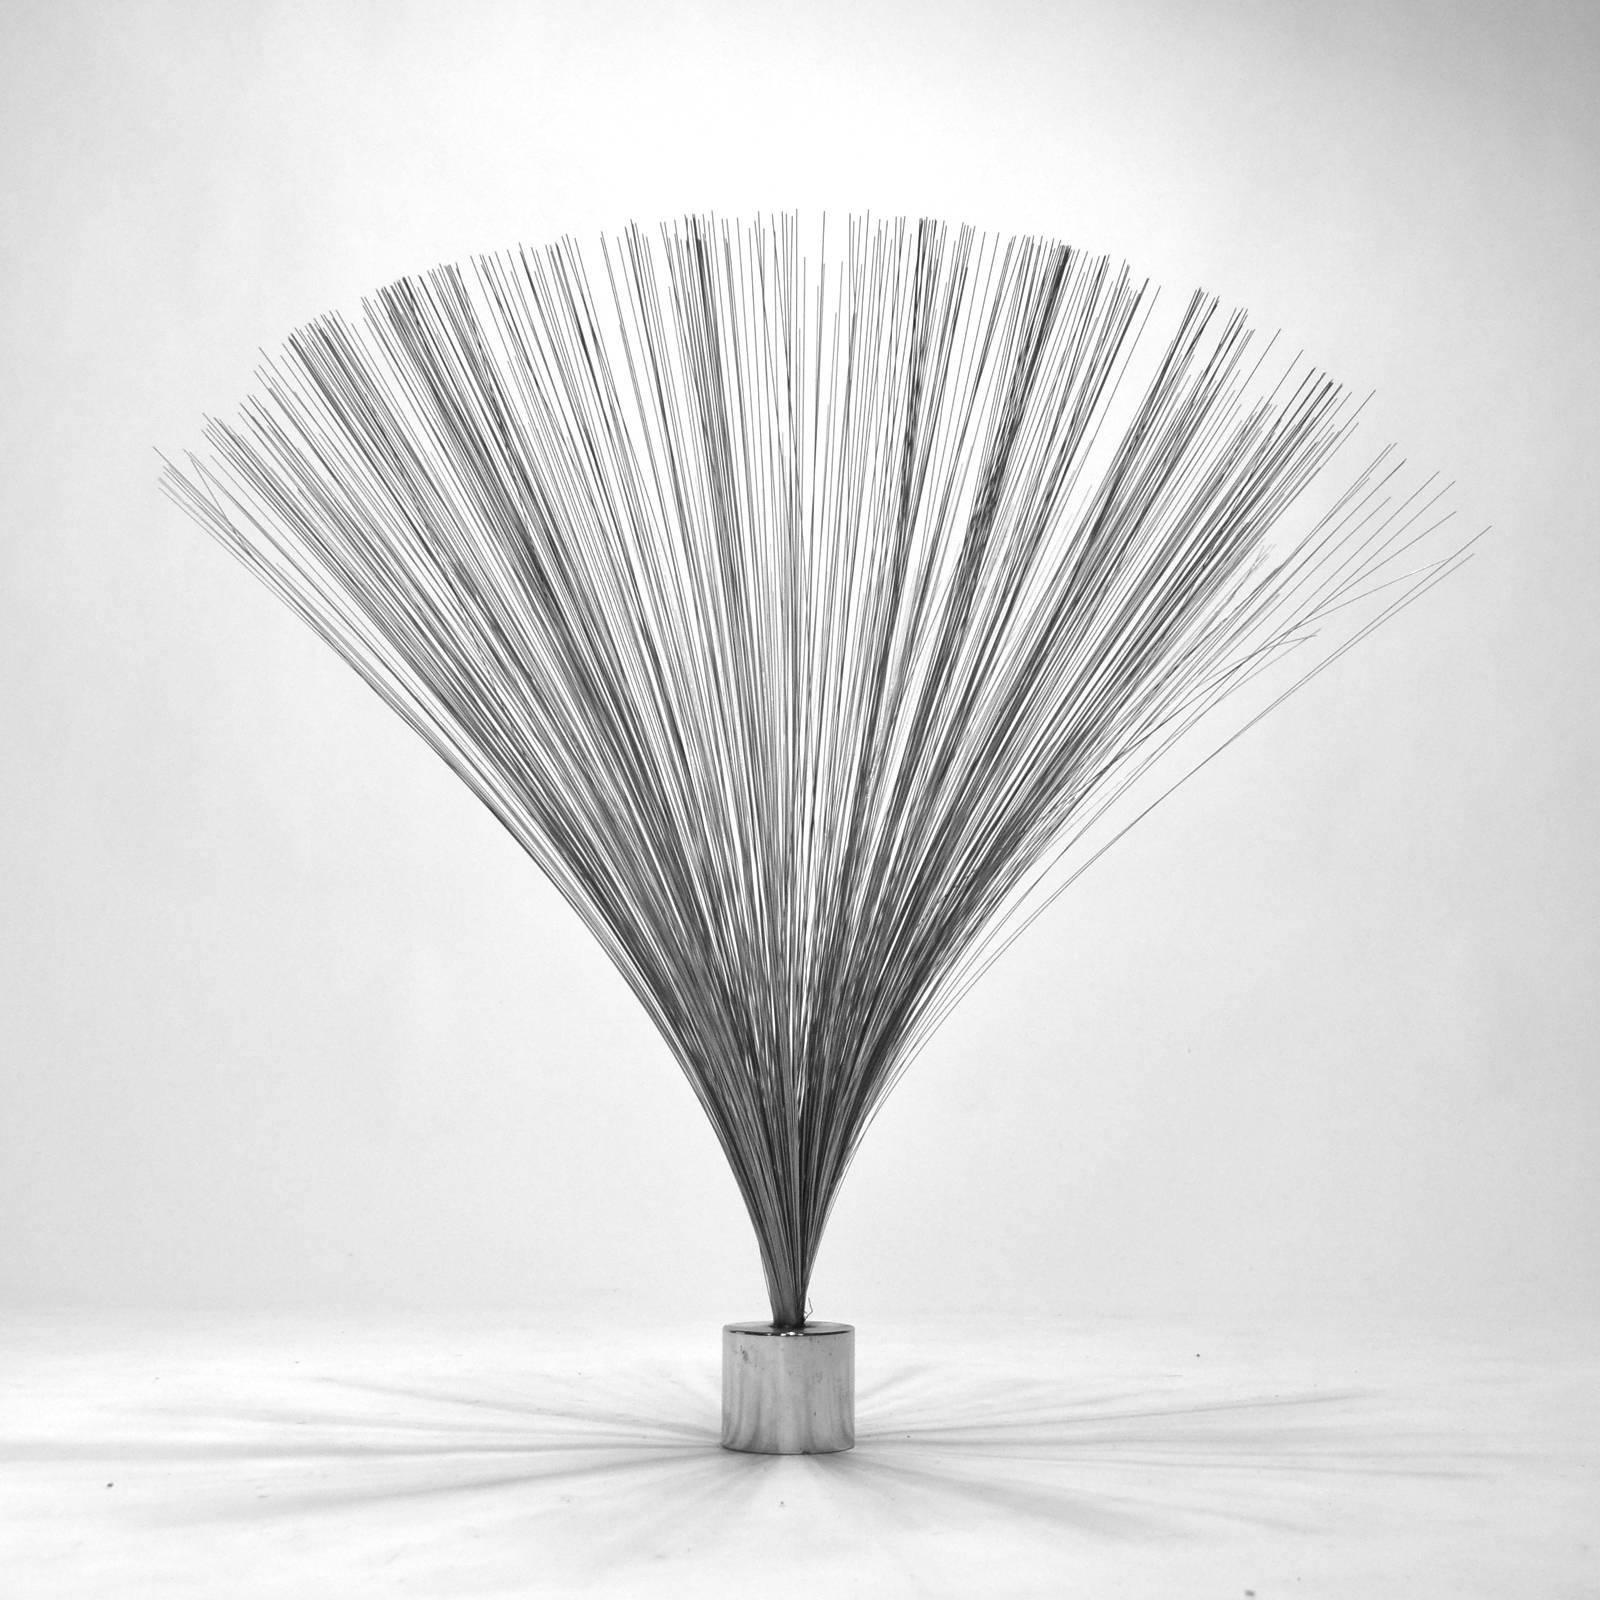 Clearly inspired by the form made famous by Harry Bertoia, this spray-shaped Kinetic sculpture is made of fine wires which can swing and sway in a soothing manner. The piece is marked with a label on the bottom of the base.